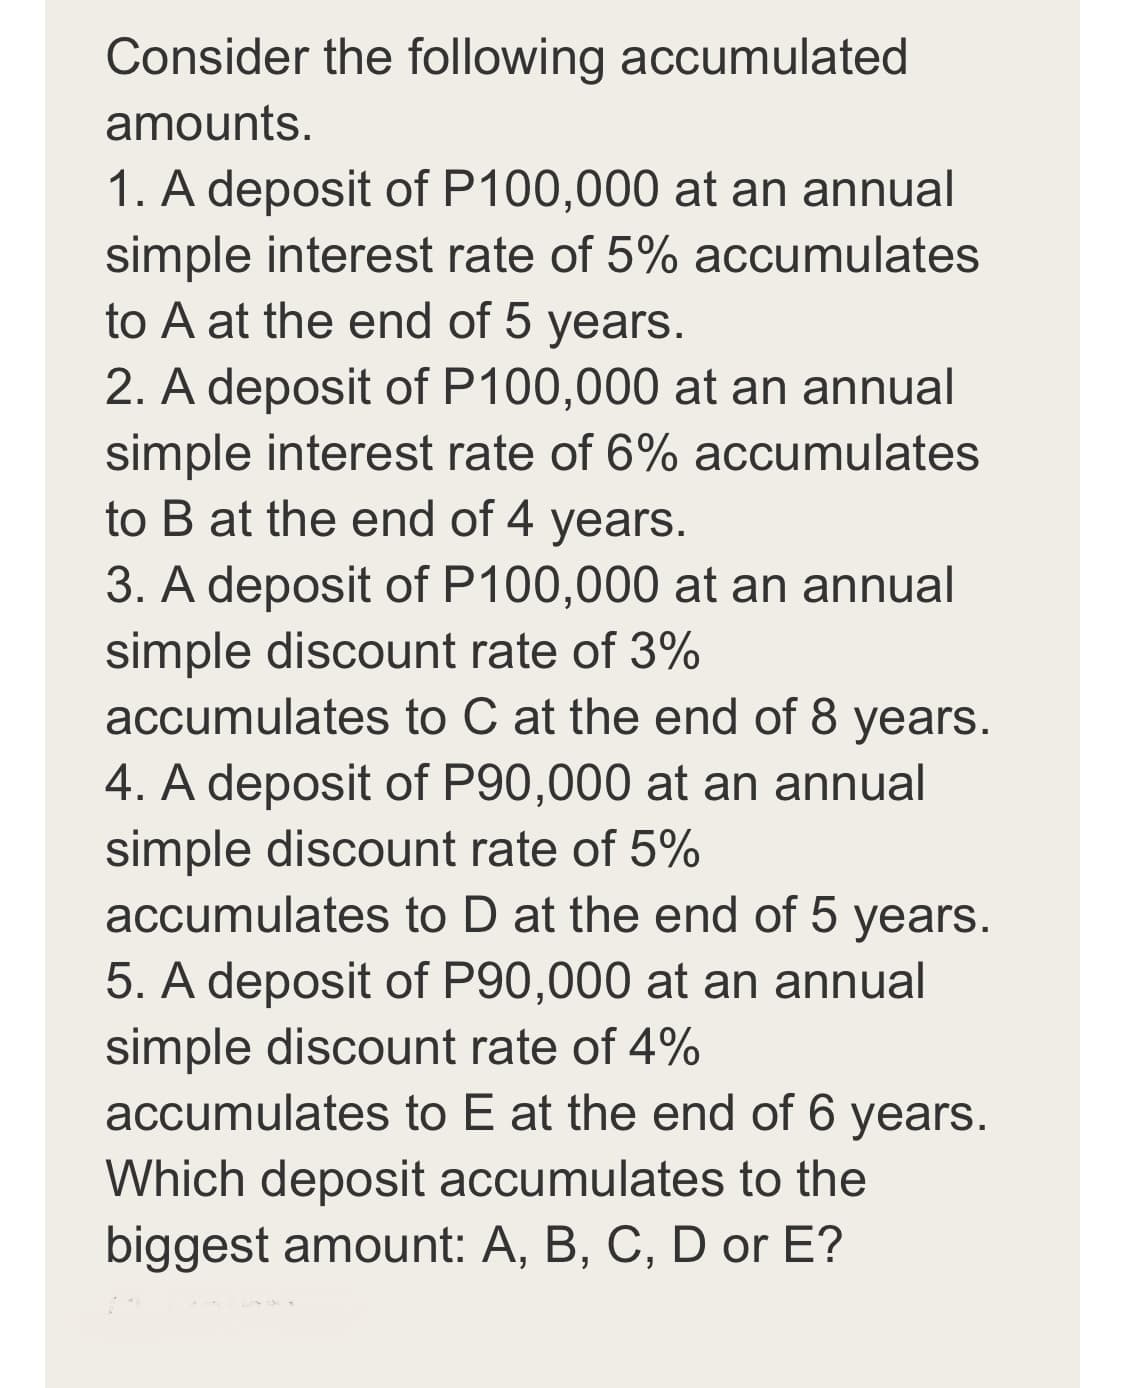 Consider the following accumulated
amounts.
1. A deposit of P100,000 at an annual
simple interest rate of 5% accumulates
to A at the end of 5 years.
2. A deposit of P100,000 at an annual
simple interest rate of 6% accumulates
to B at the end of 4 years.
3. A deposit of P100,000 at an annual
simple discount rate of 3%
accumulates to C at the end of 8 years.
4. A deposit of P90,000 at an annual
simple discount rate of 5%
accumulates to D at the end of 5 years.
5. A deposit of P90,000 at an annual
simple discount rate of 4%
accumulates to E at the end of 6 years.
Which deposit accumulates to the
biggest amount: A, B, C, D or E?